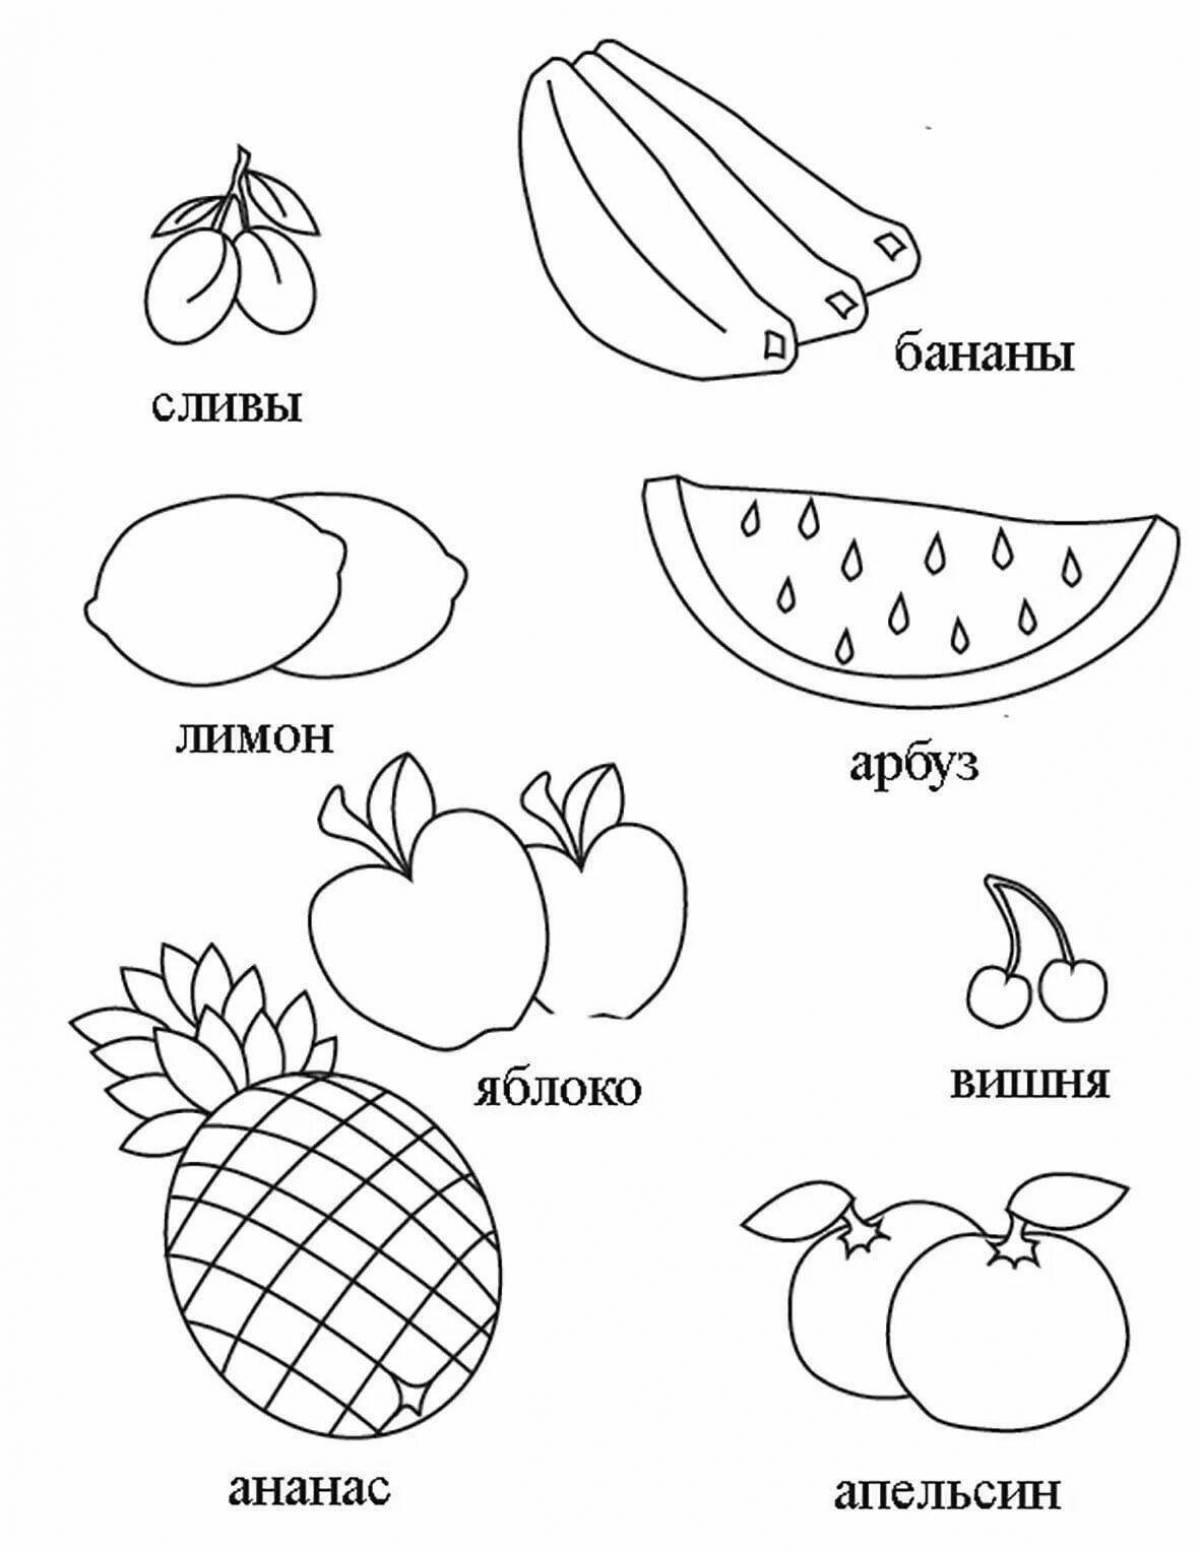 Innovative fruit coloring page for 2-3 year olds